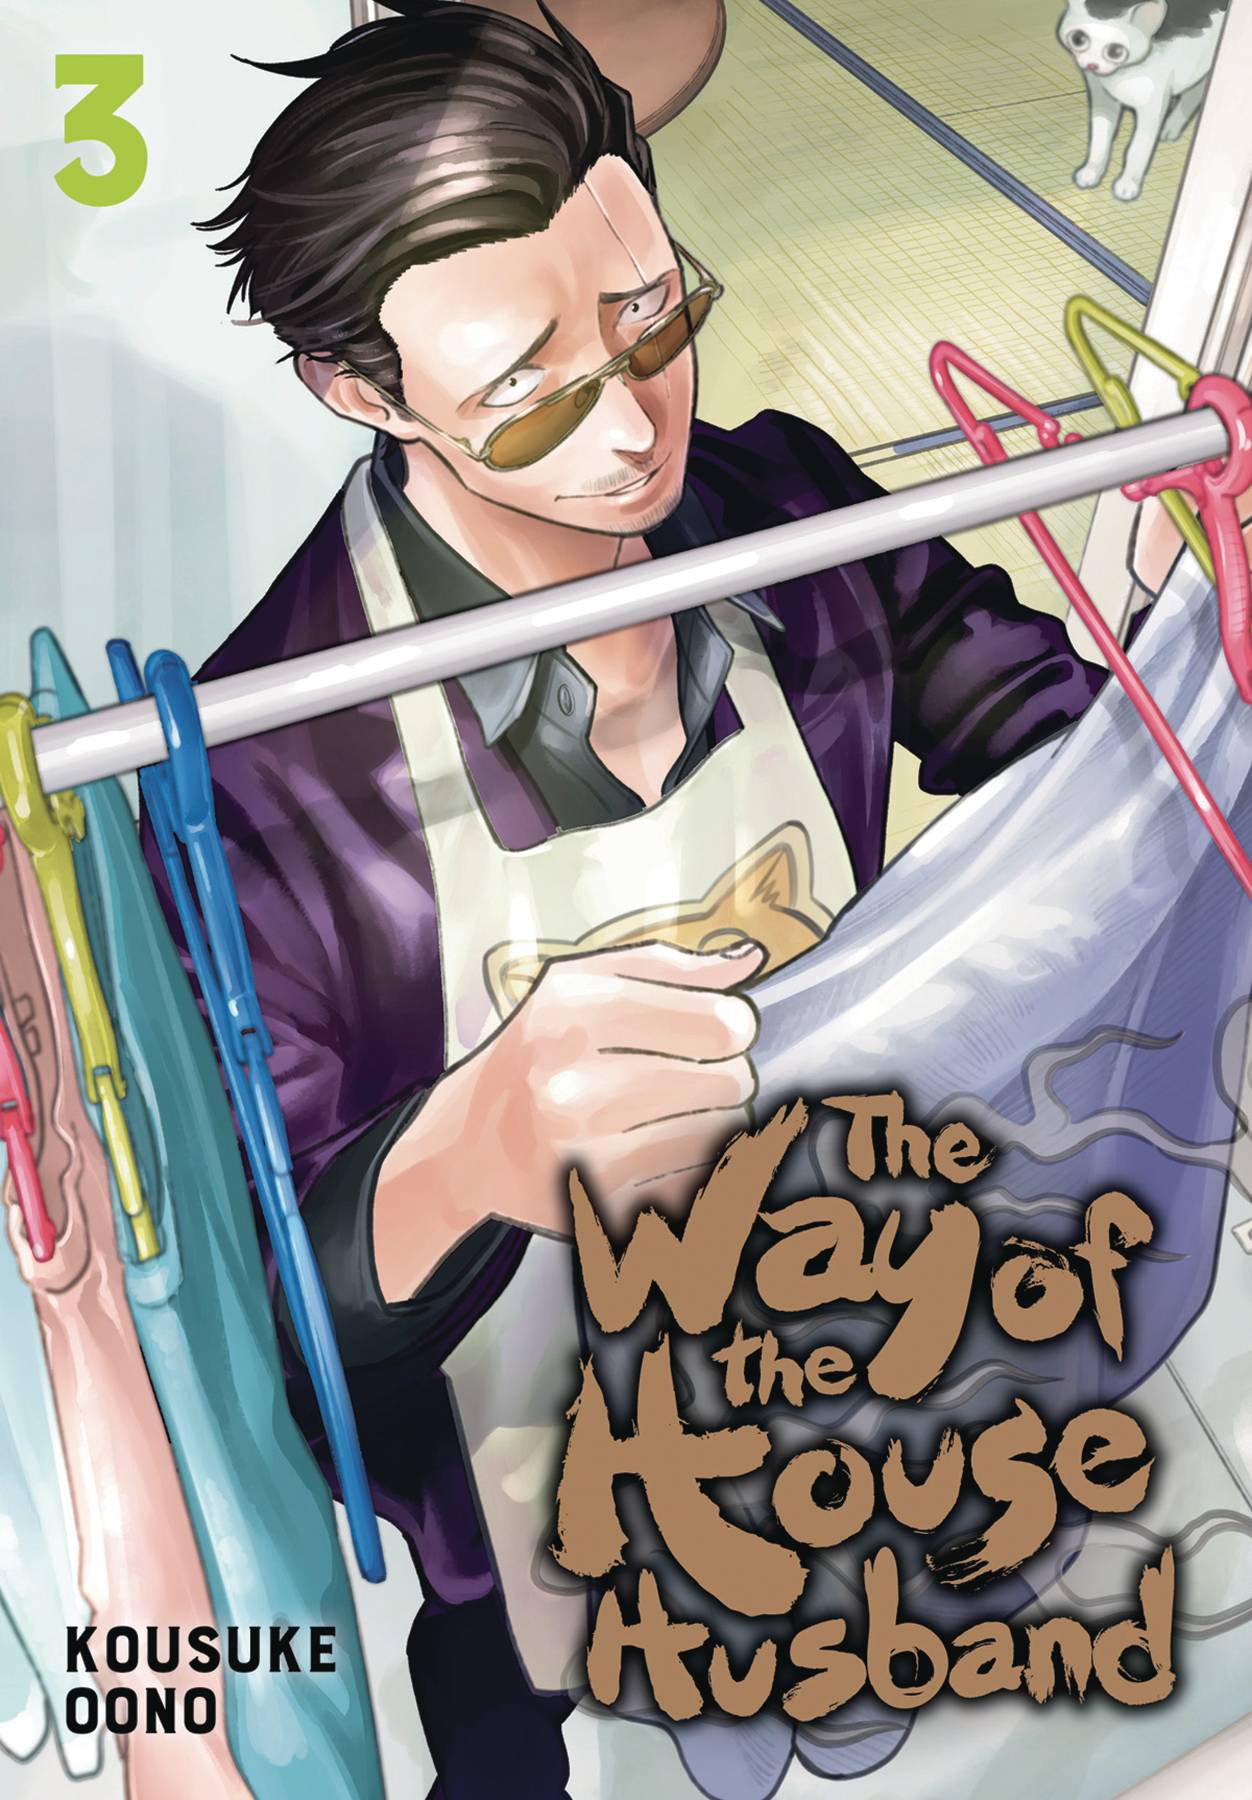 WAY OF THE HOUSEHUSBAND GN VOL 03